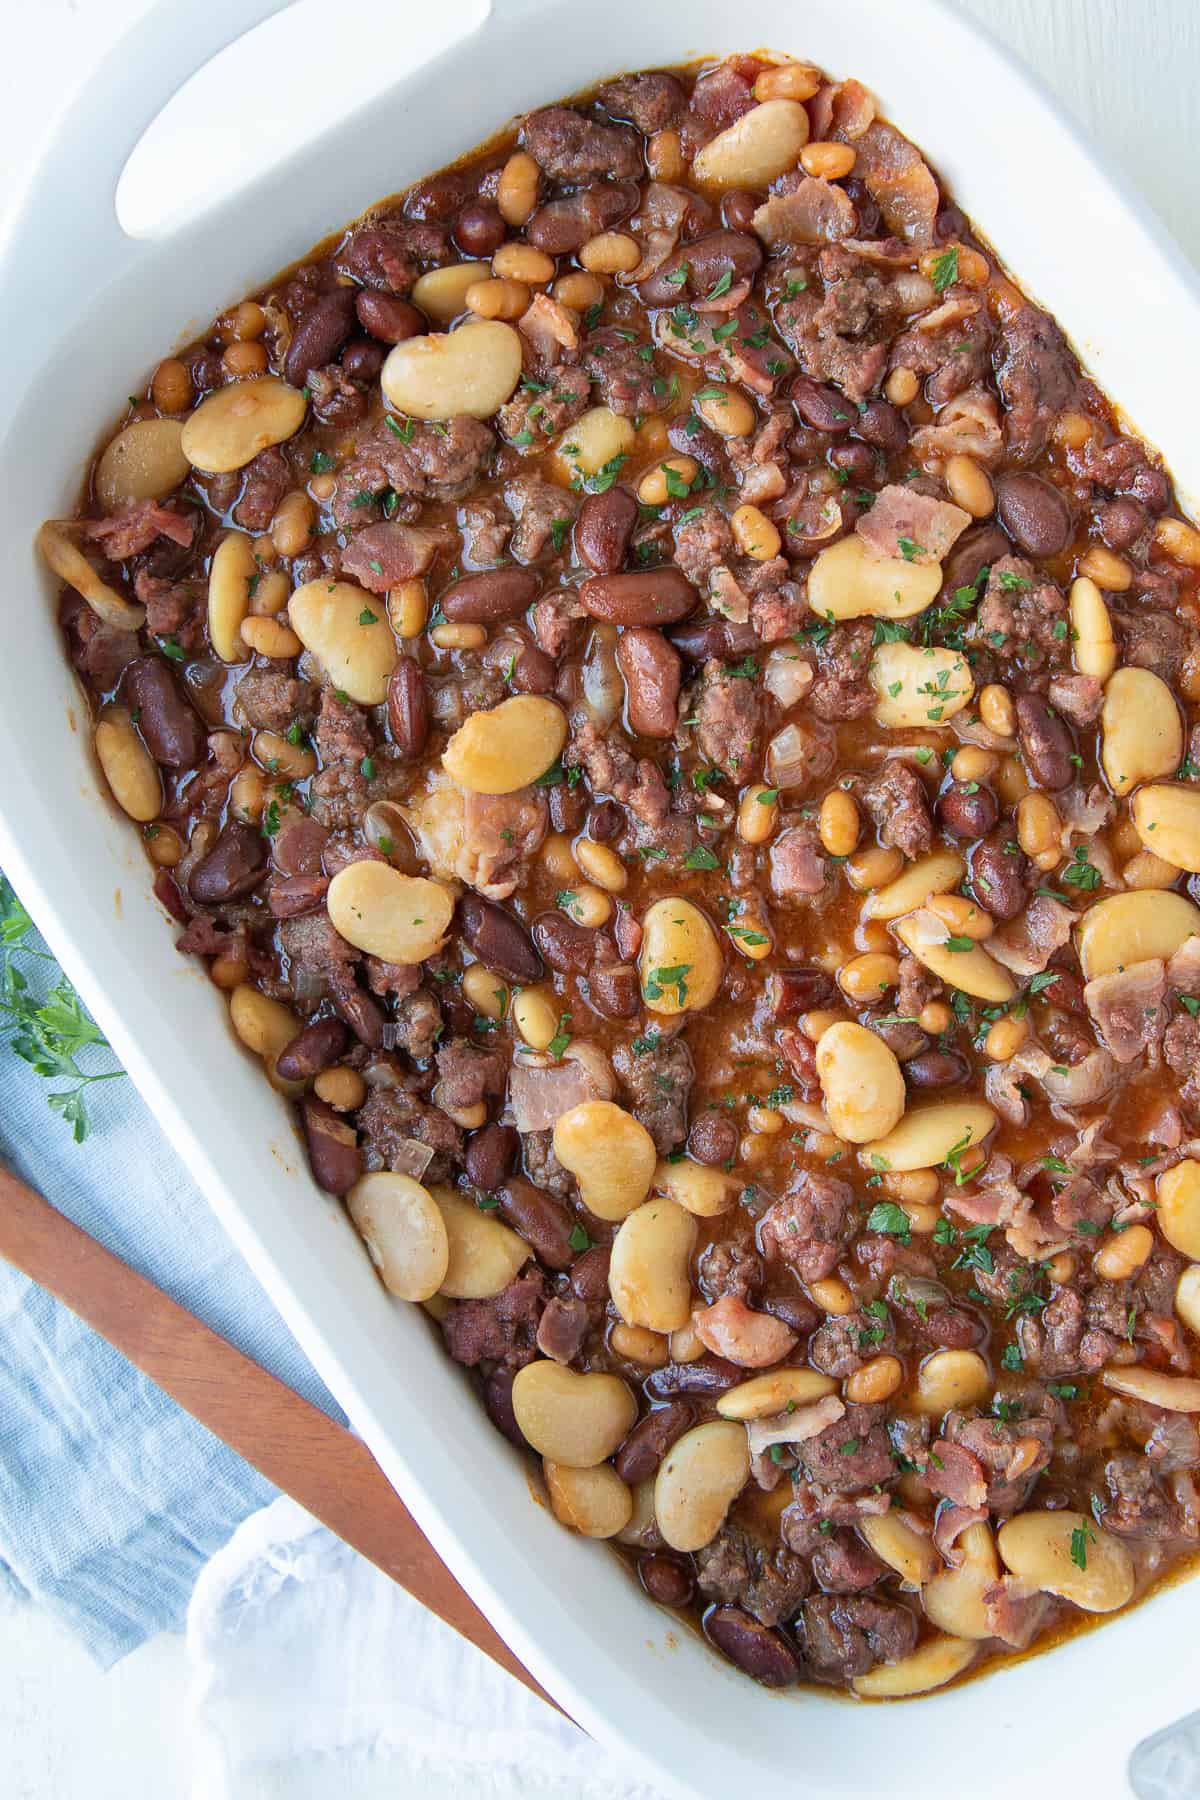 baked calico beans in a large white casserole dish.